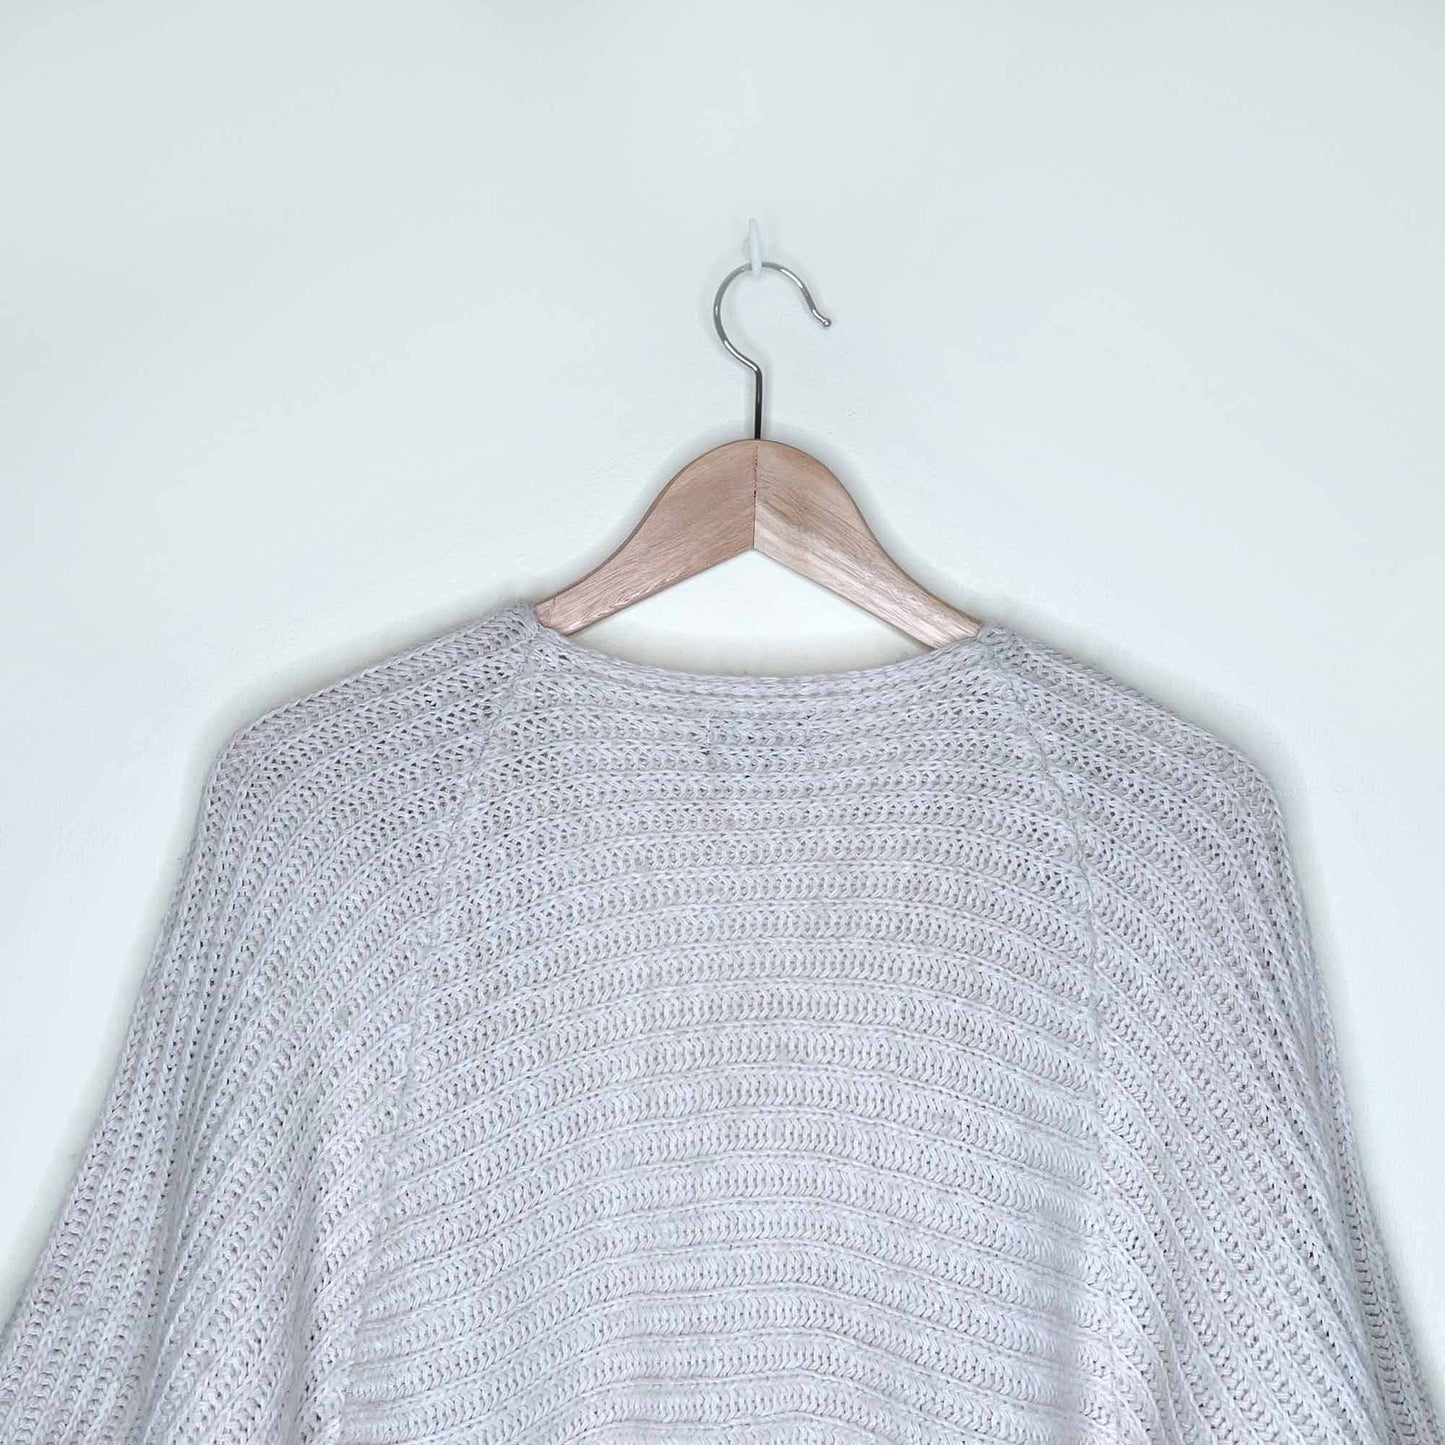 h trend wool-mohair blend open shrug cardigan sweater - size small